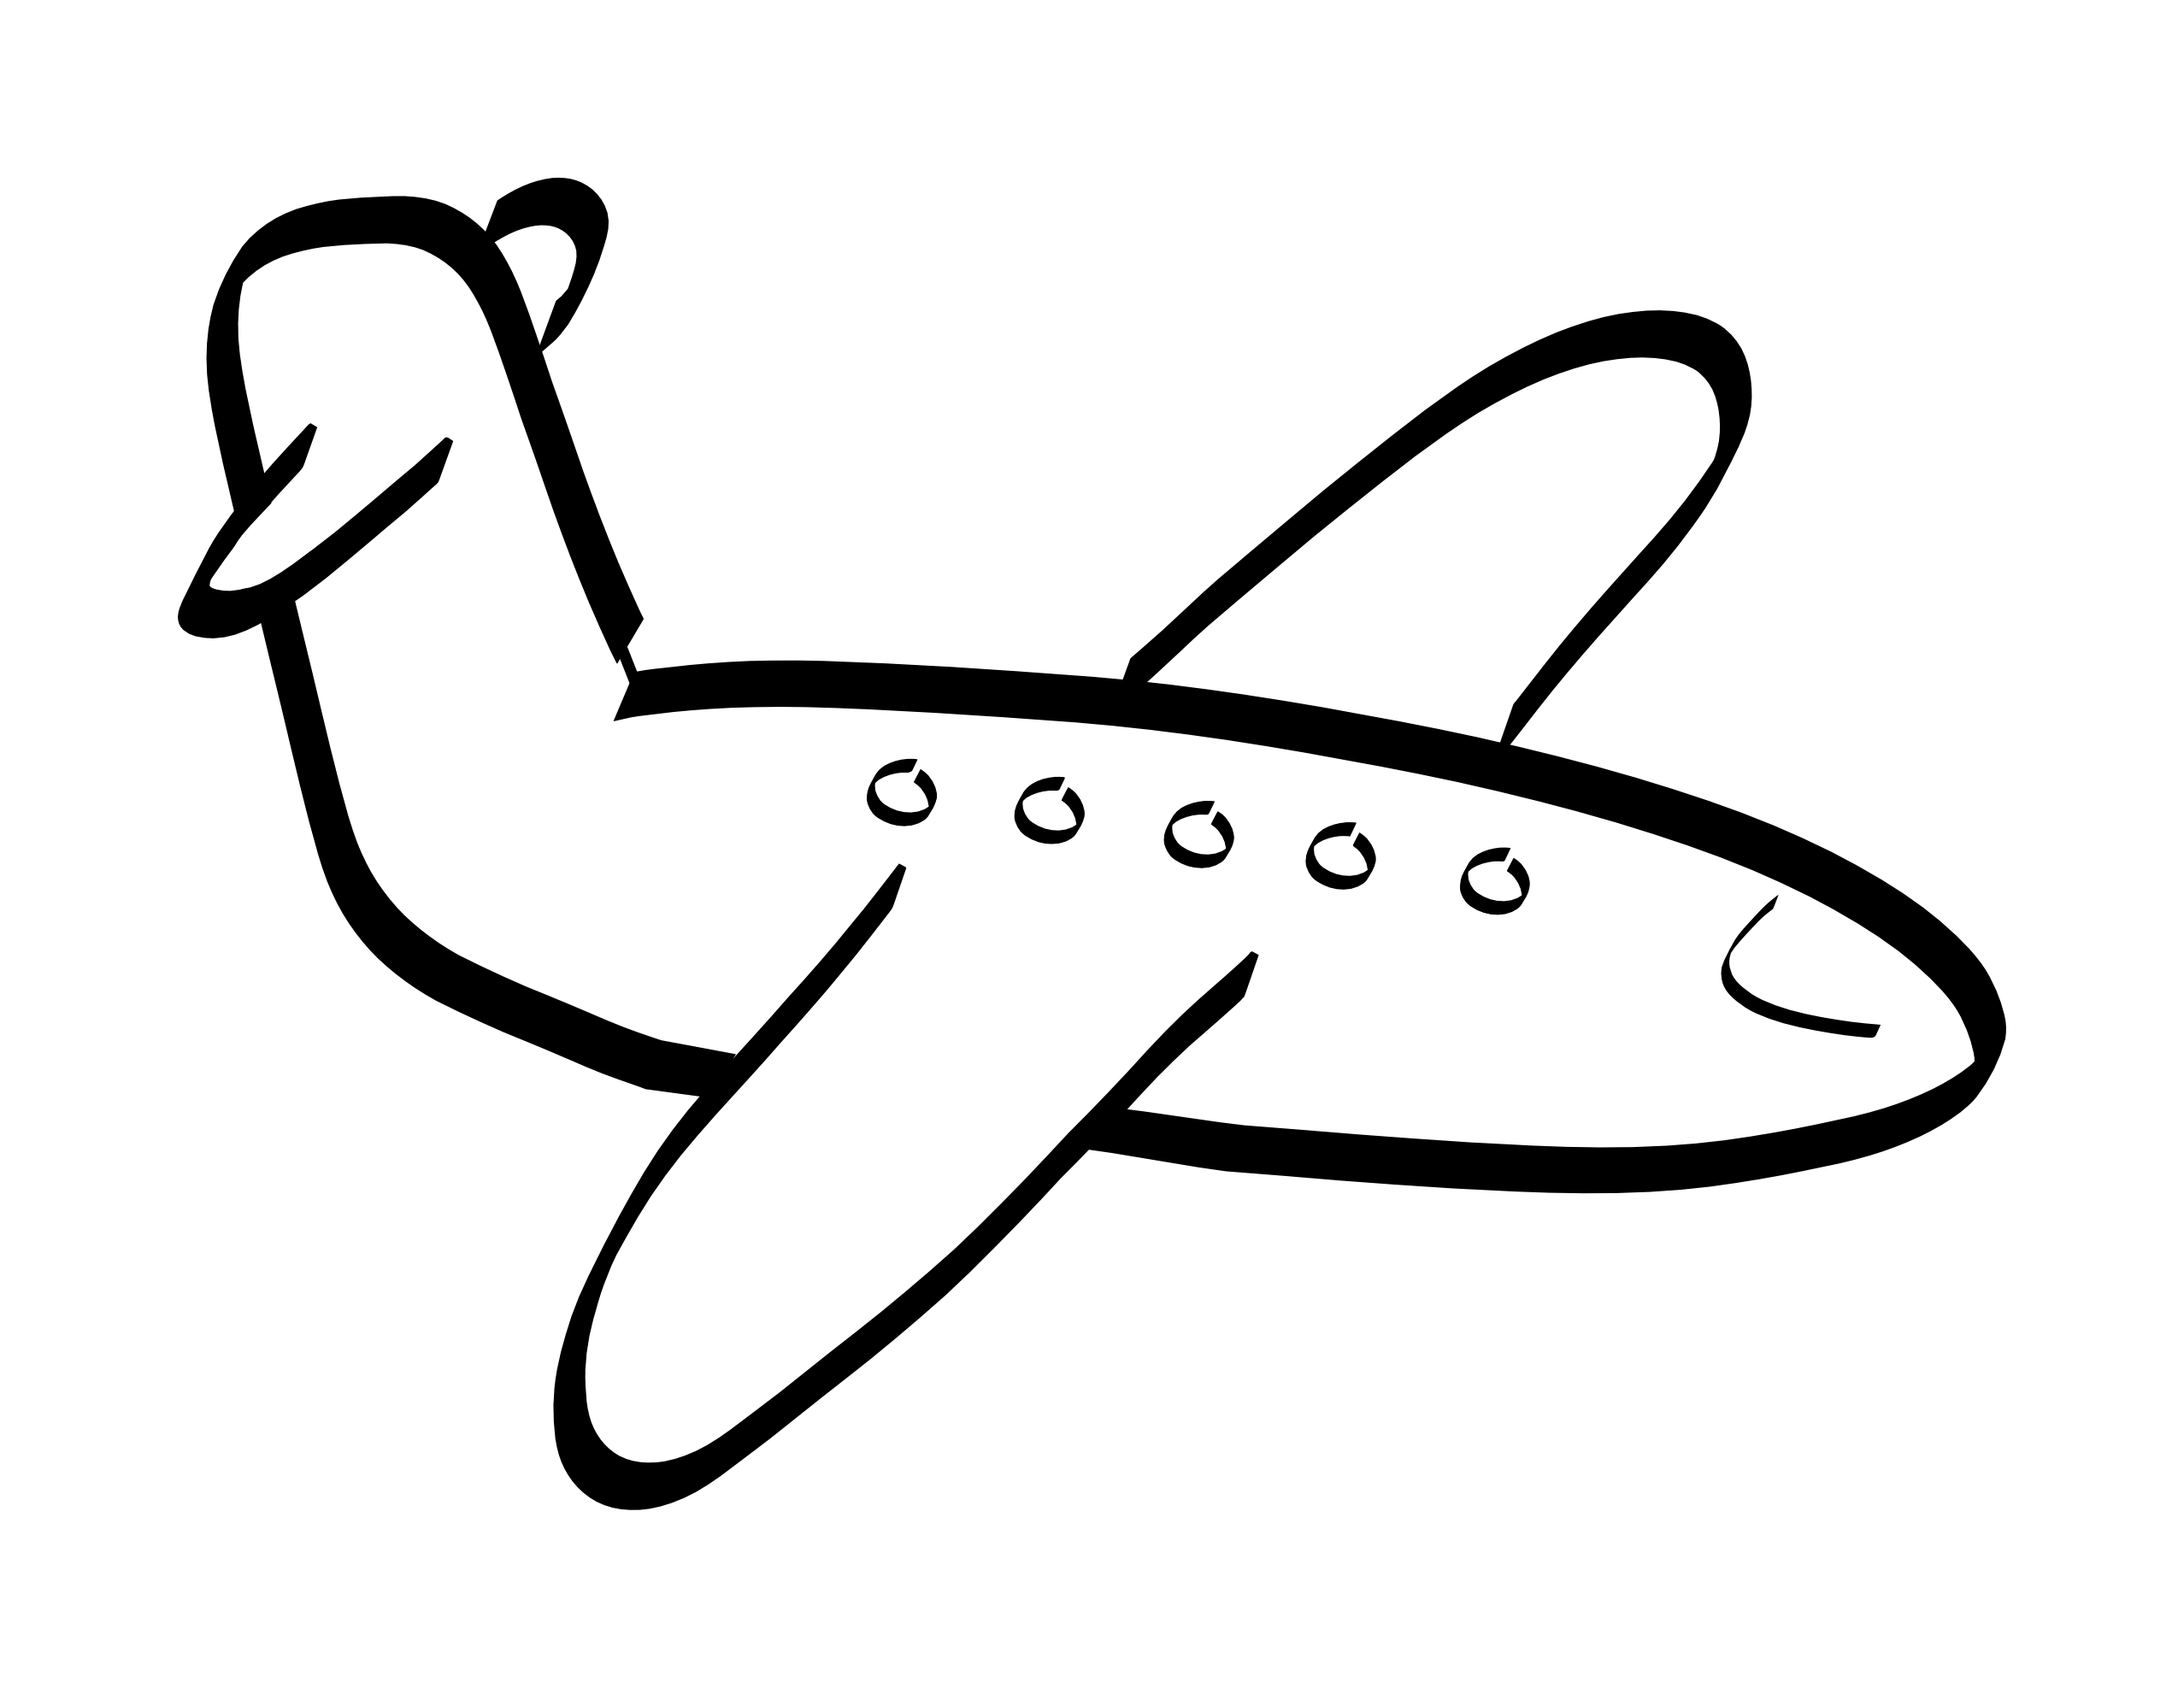 Png free black and. Airplane clipart line